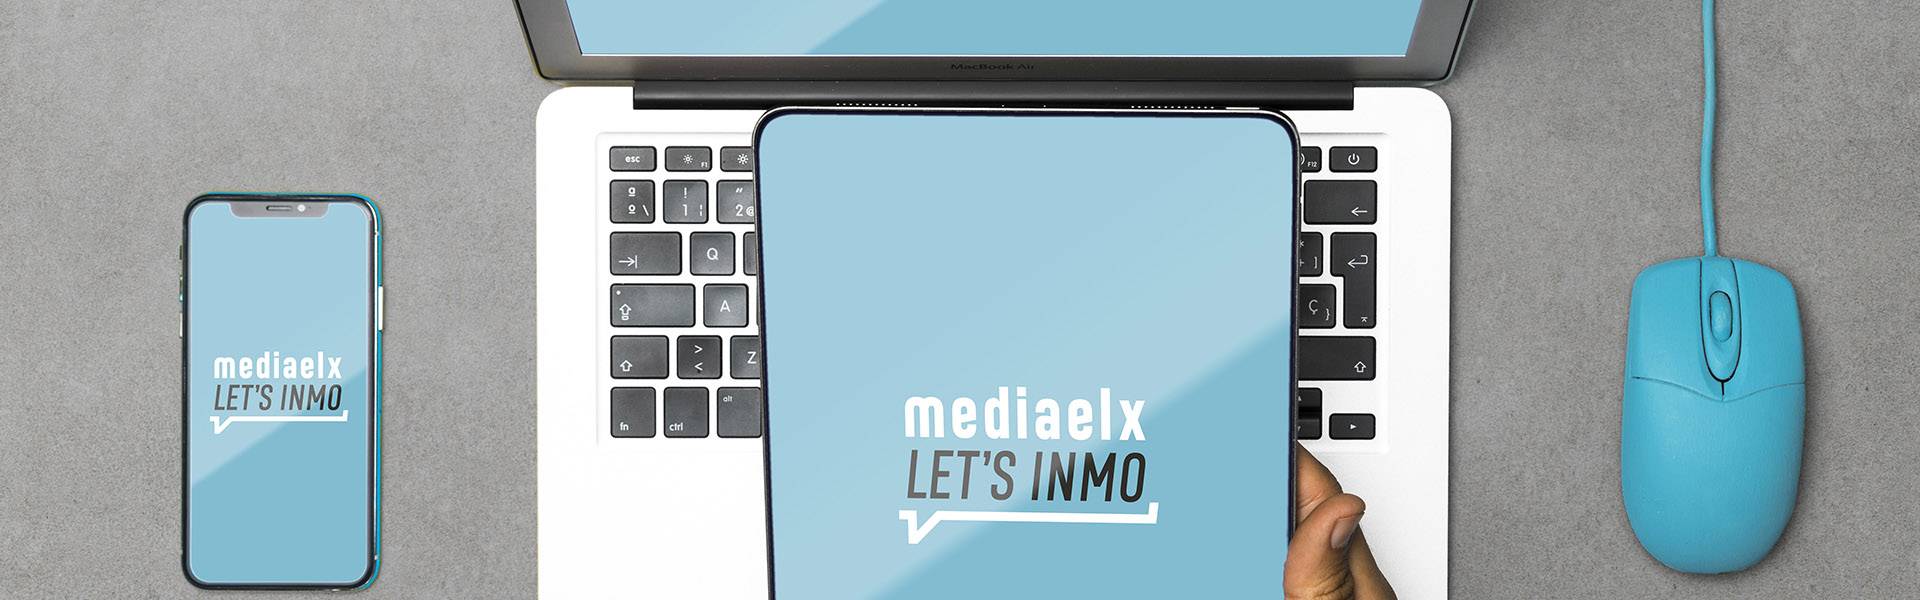 Are you having trouble adapting your real estate agency to the digital world? At Mediaelx we prepare you for the change